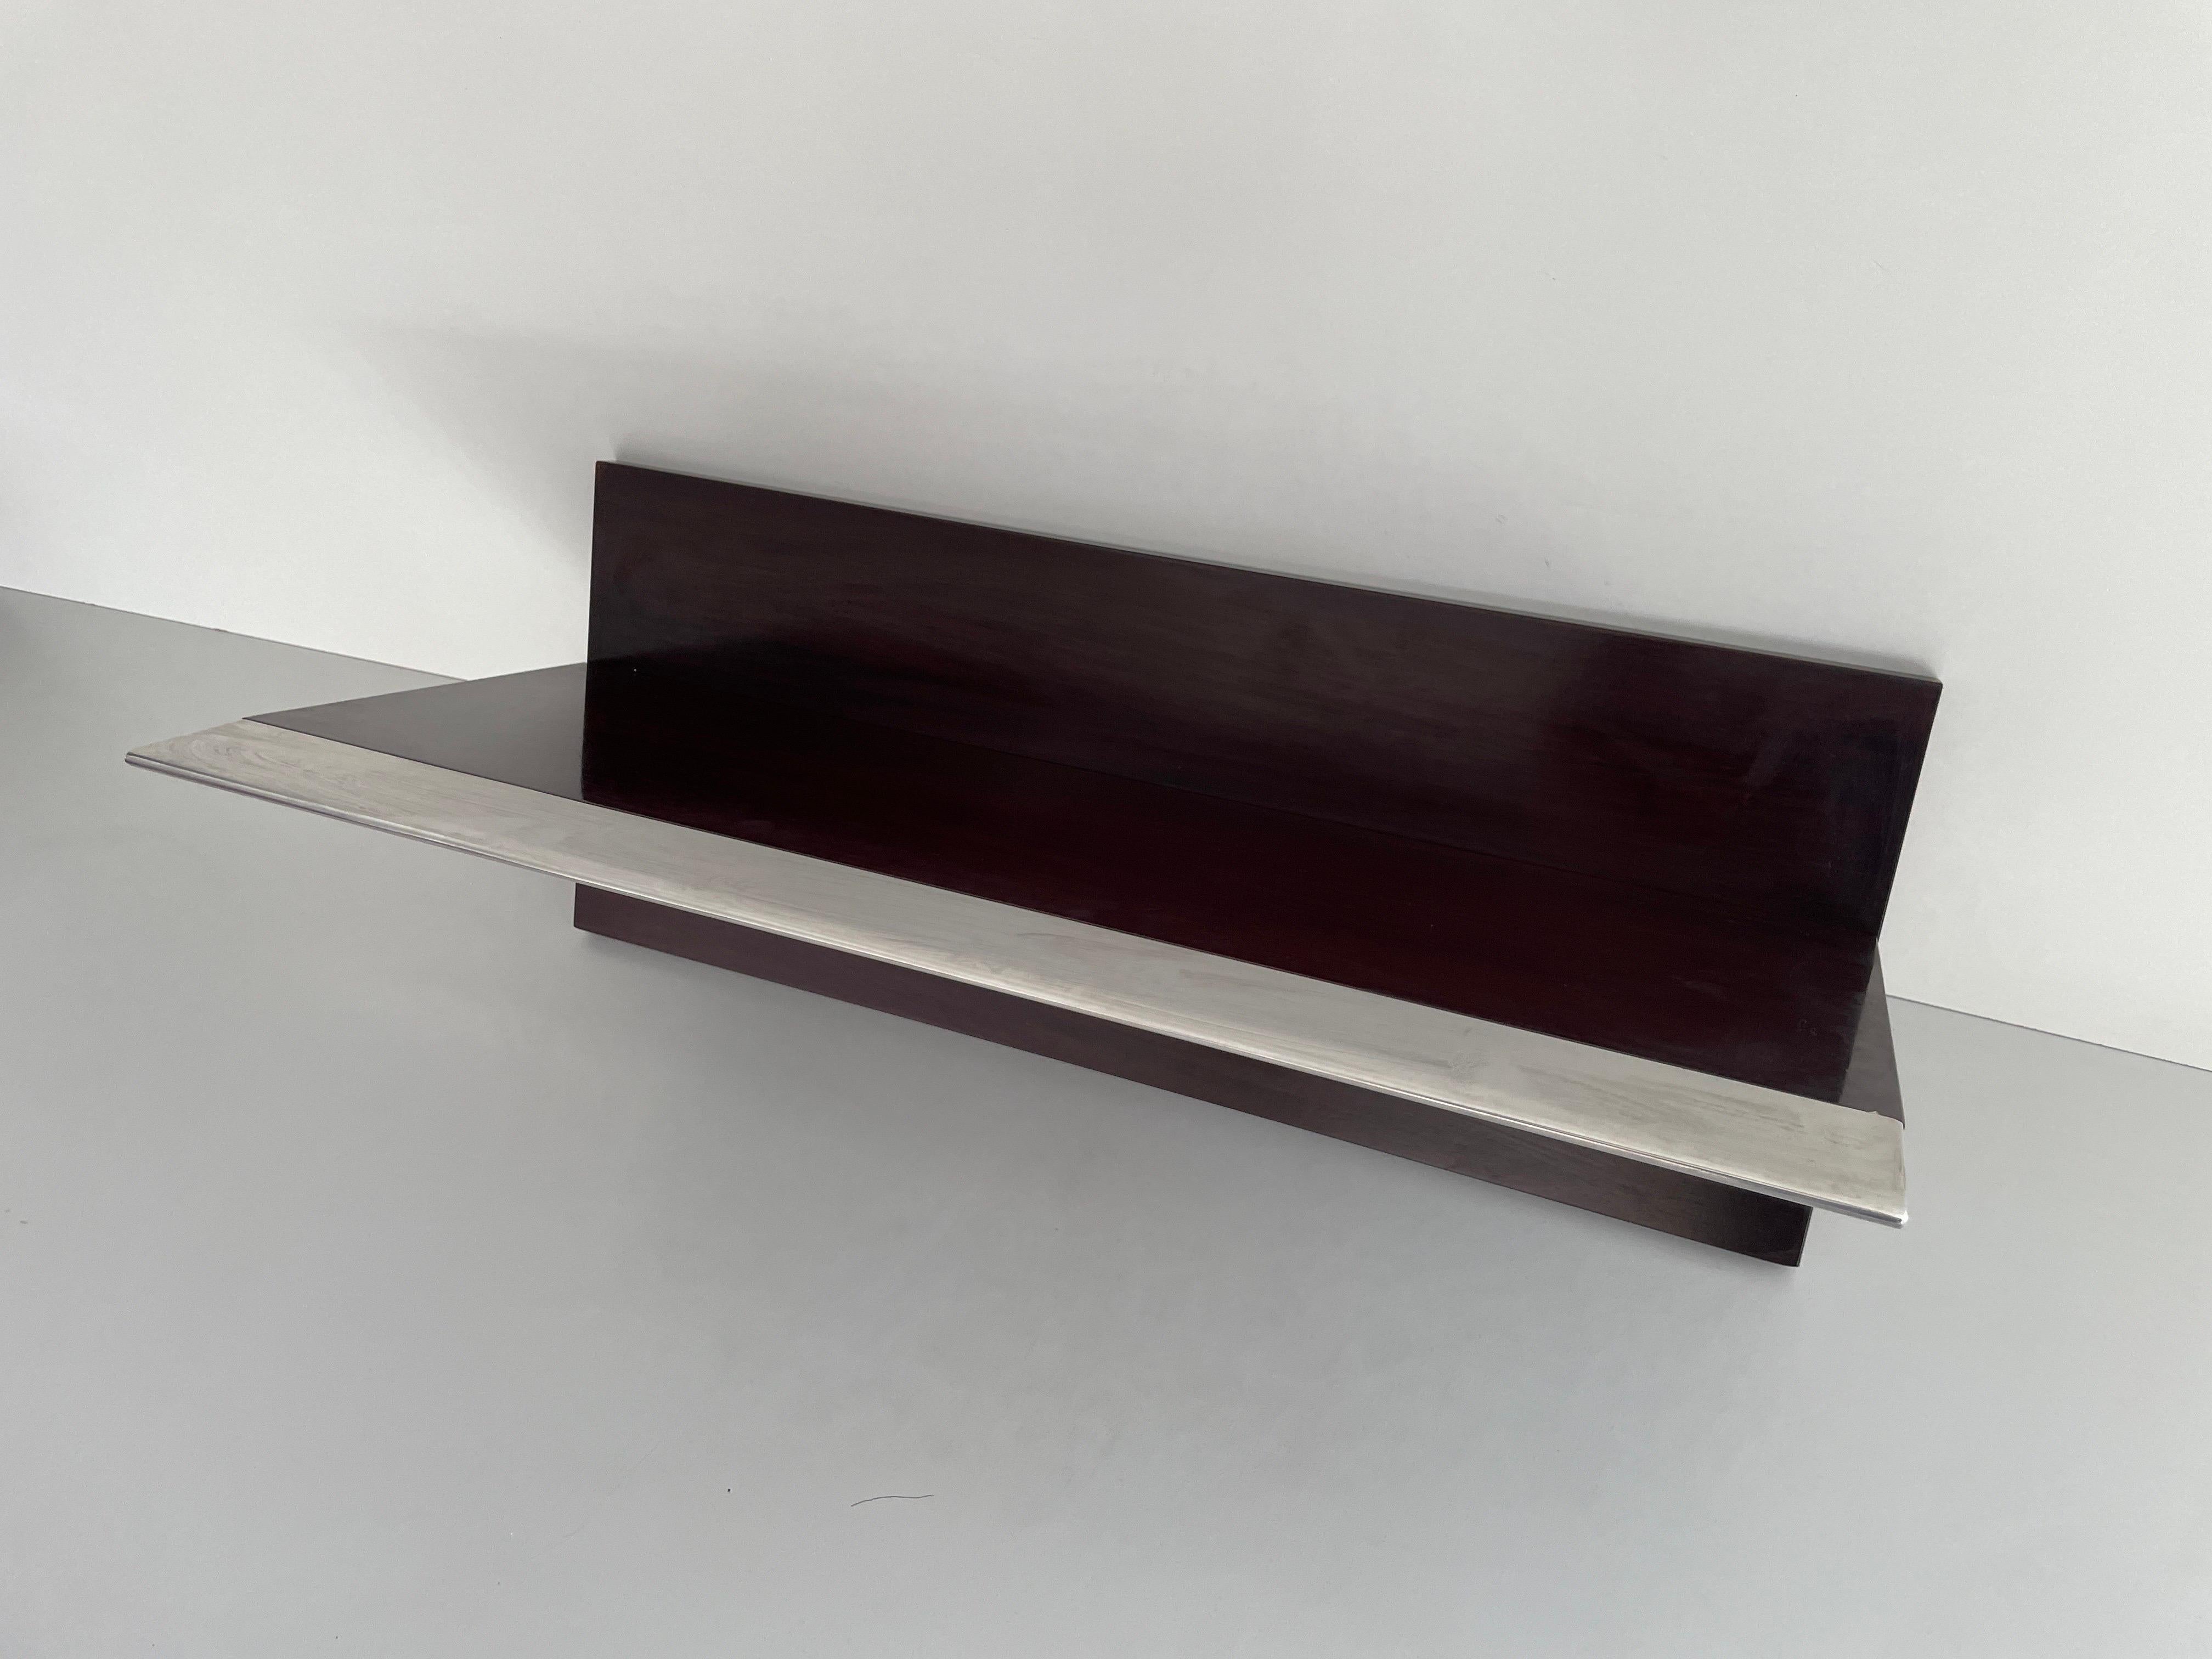 Italian Mid-century Modern Rosewood Shelf with Steel Cover by Saporiti, 1960s, Italy For Sale